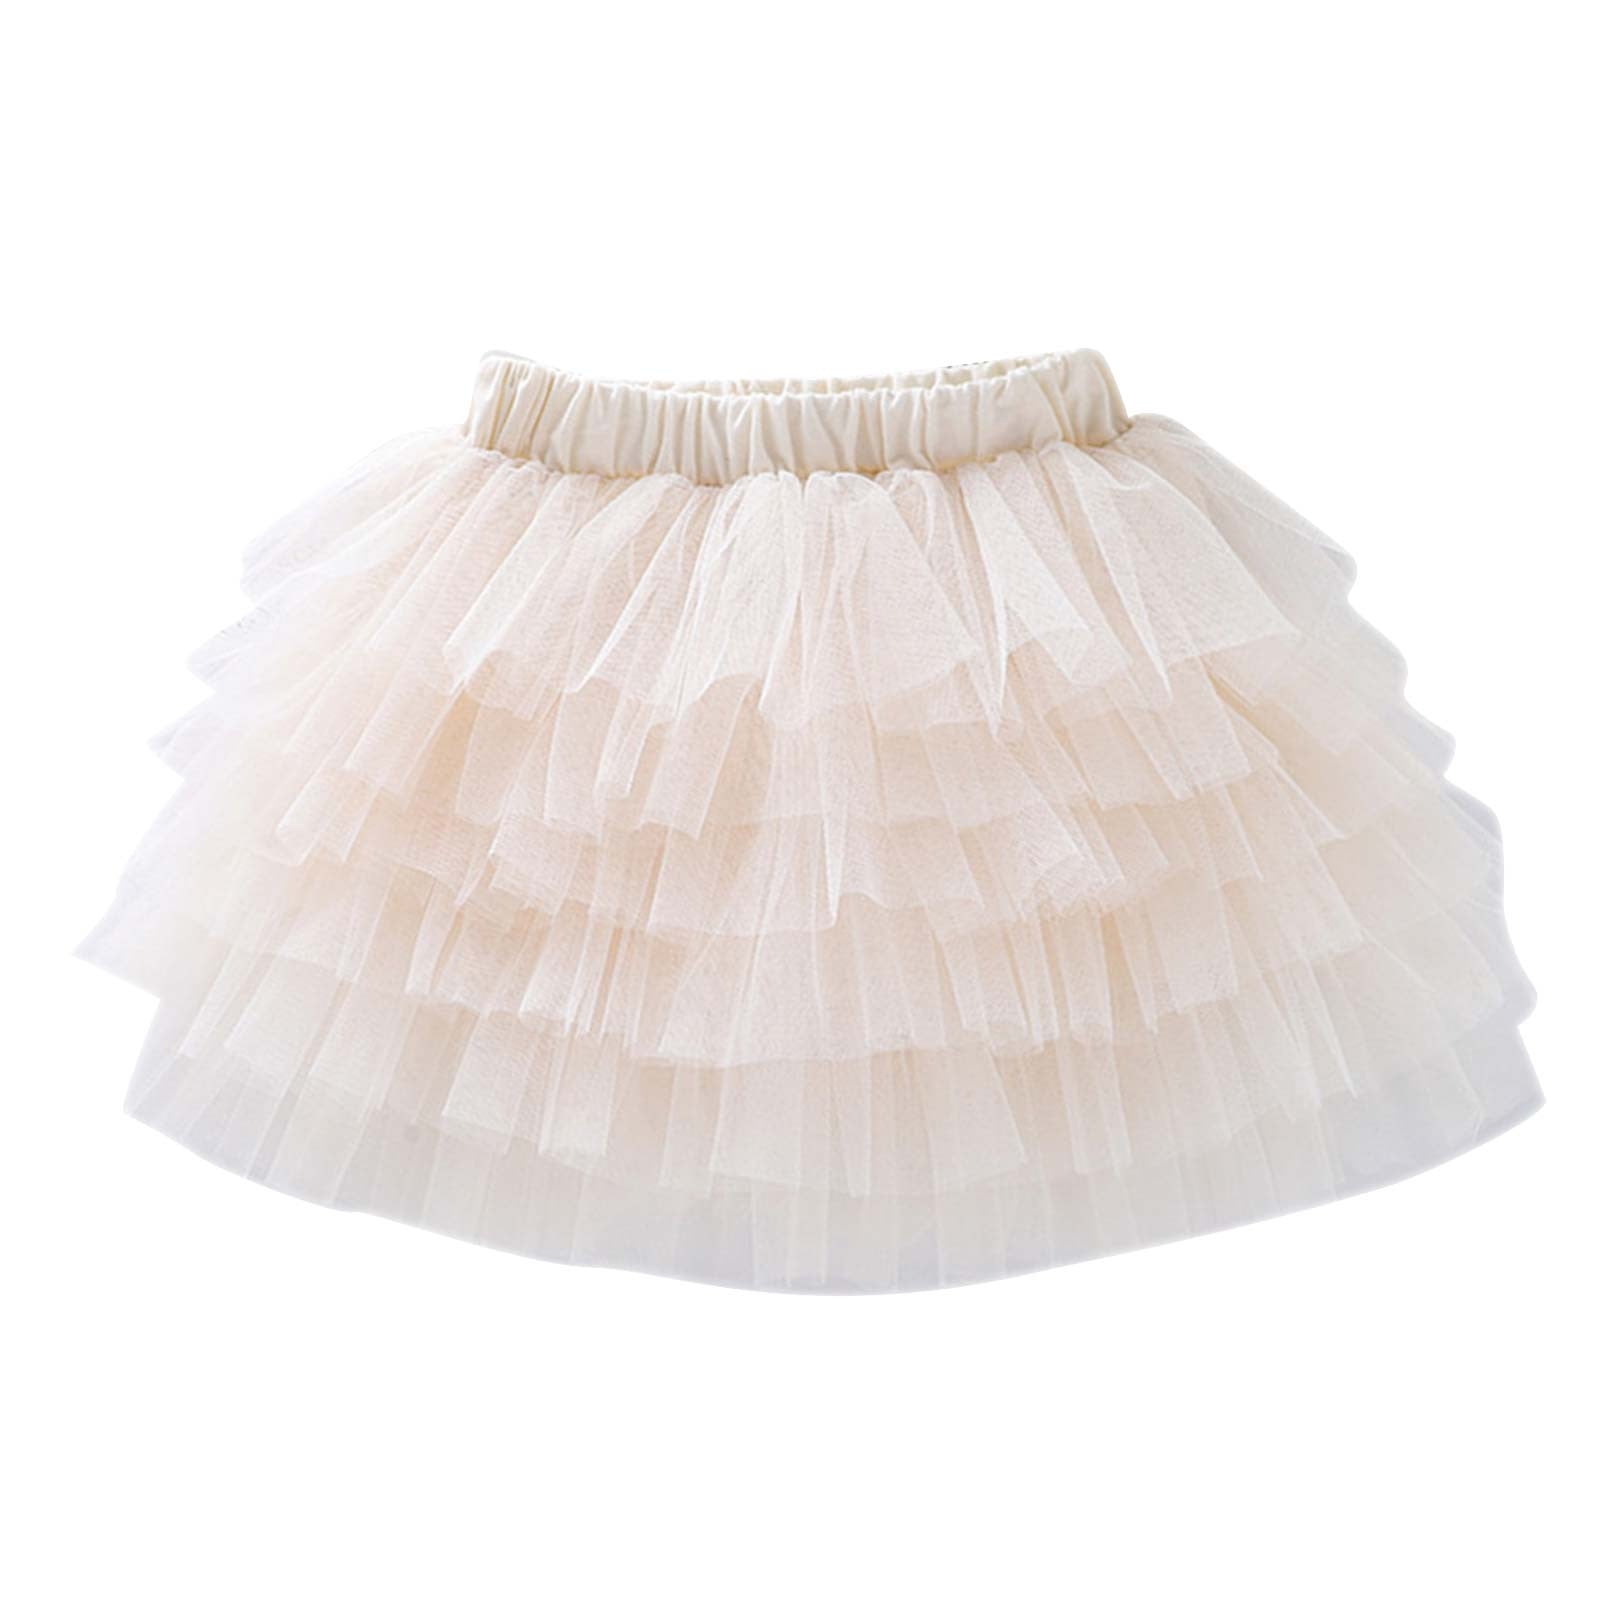 White Tulle Skirts For Women Cute Short Skirts With Champagne Ribbon Sashes  Ball Gown Midi Skirts Without Denim Shirt From Yoursexy_cute, $22.95